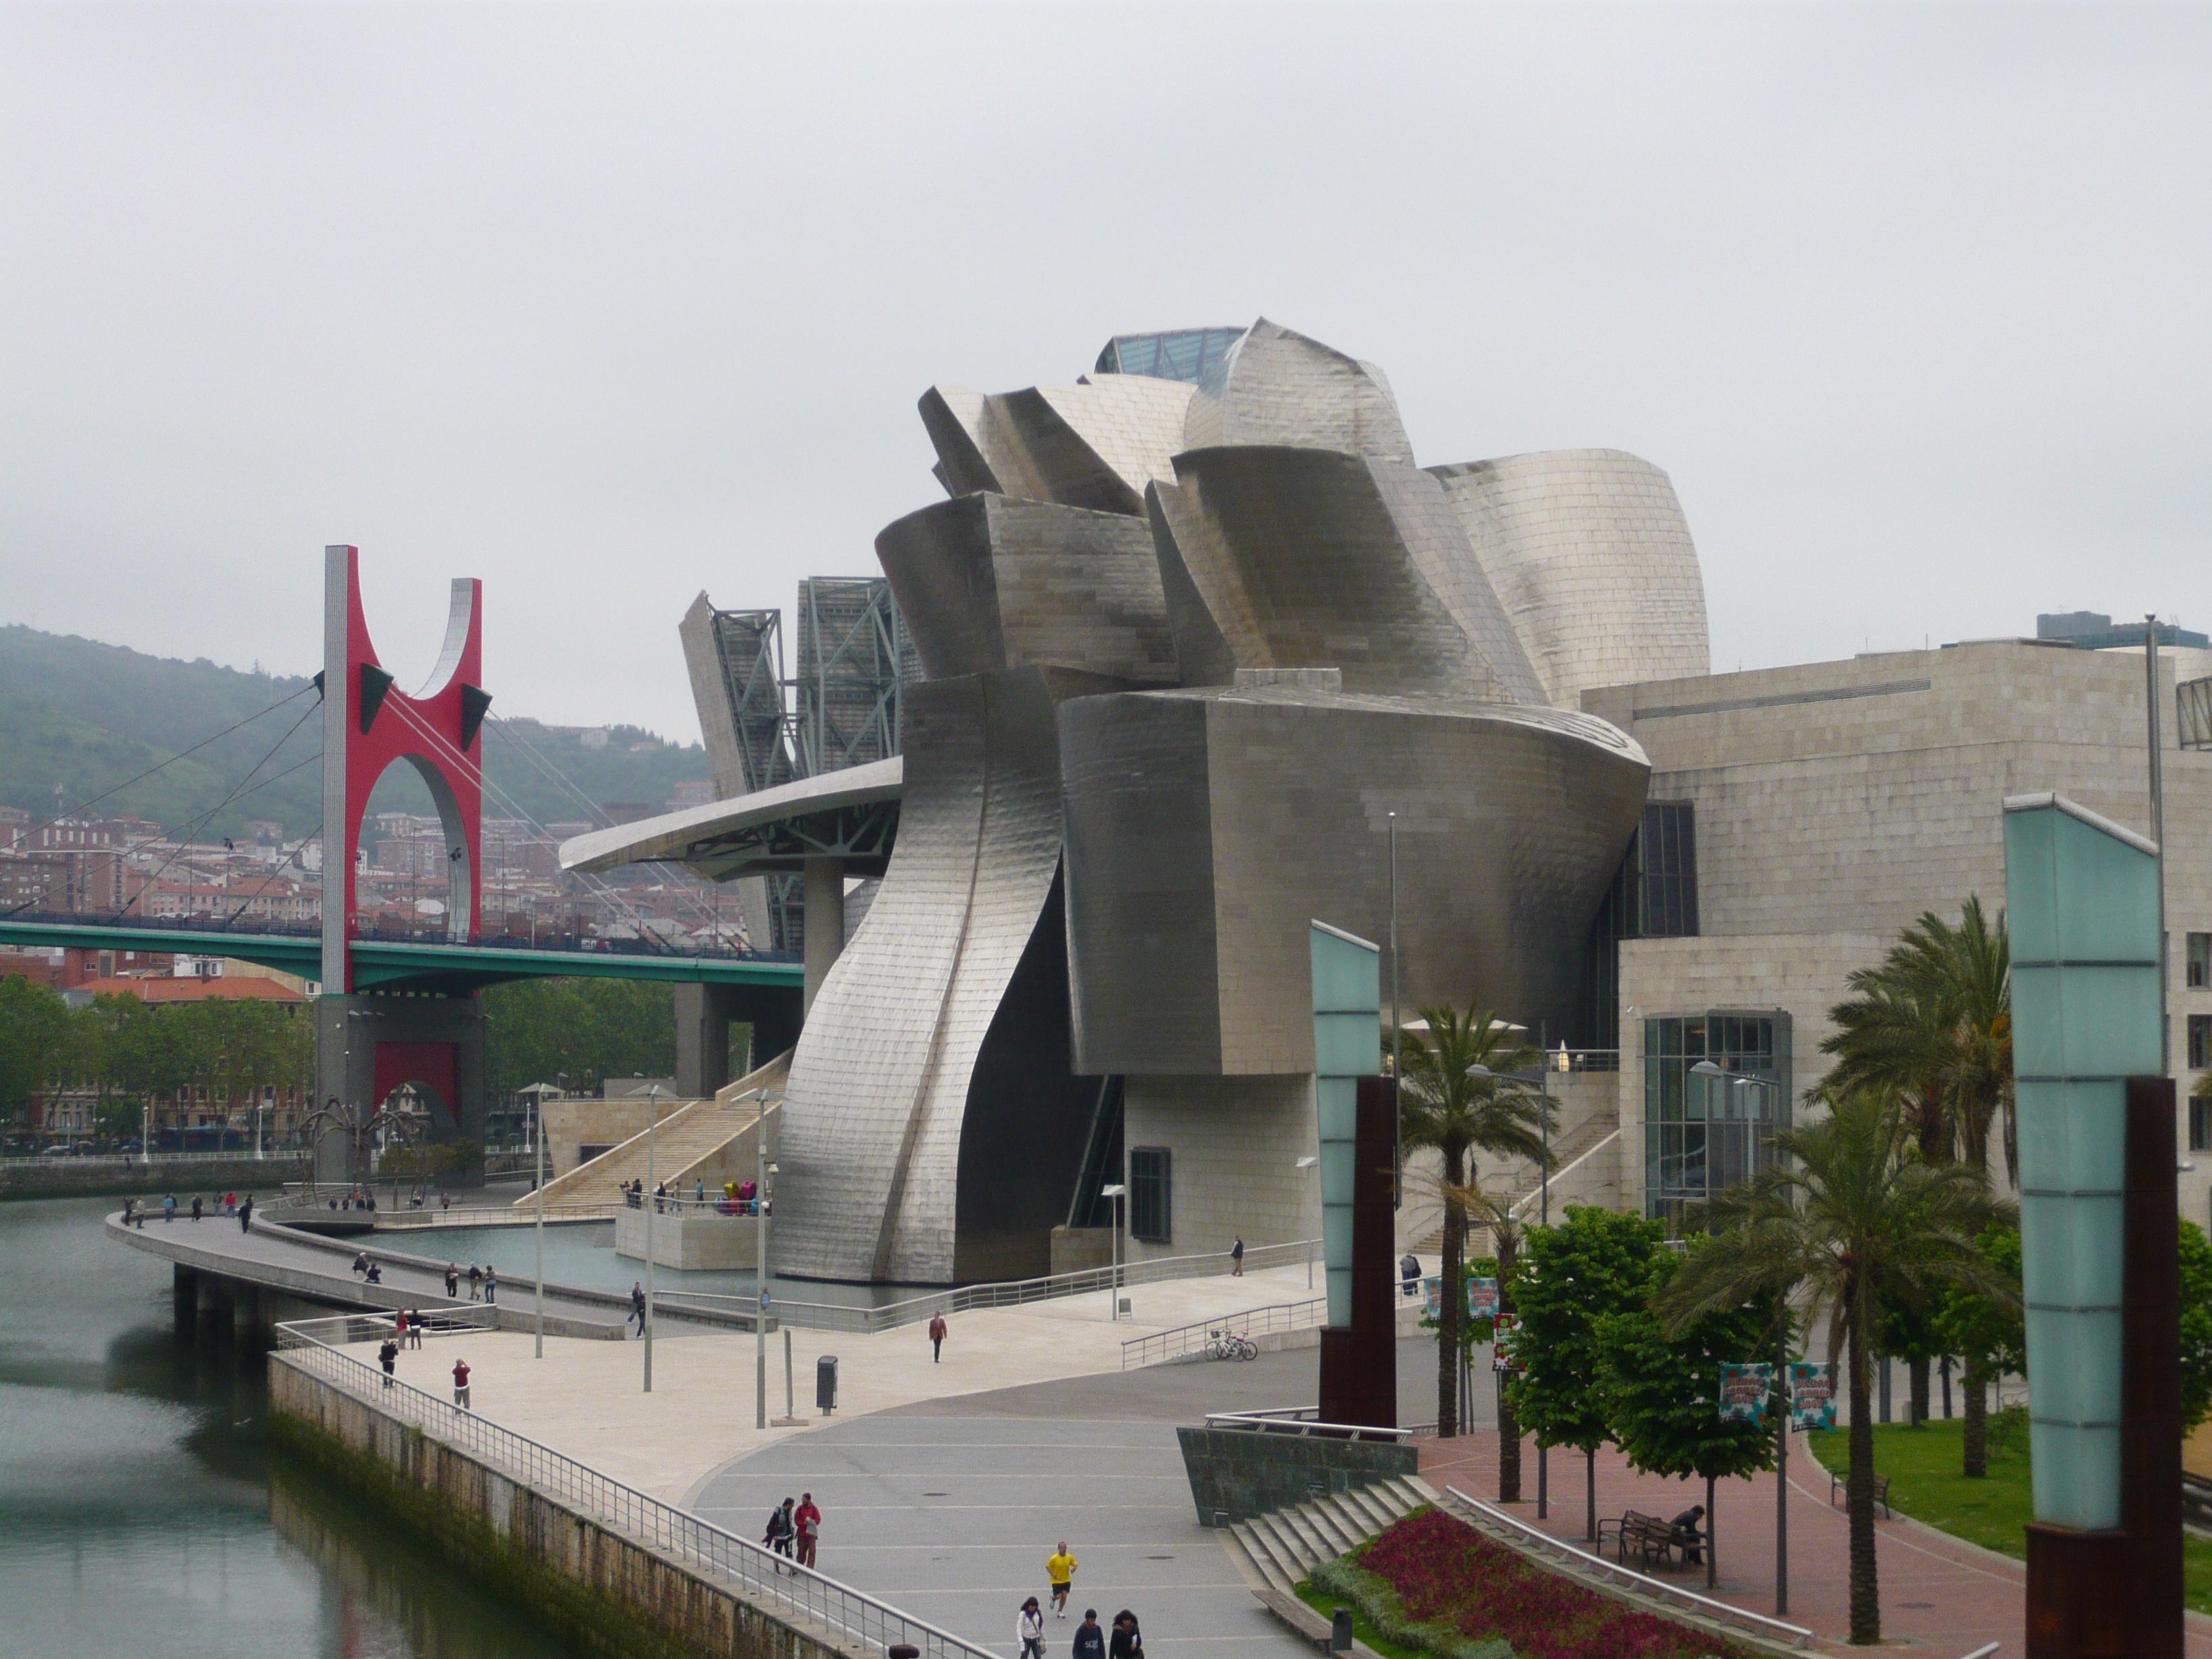 Postcards from Bilbao, Spain